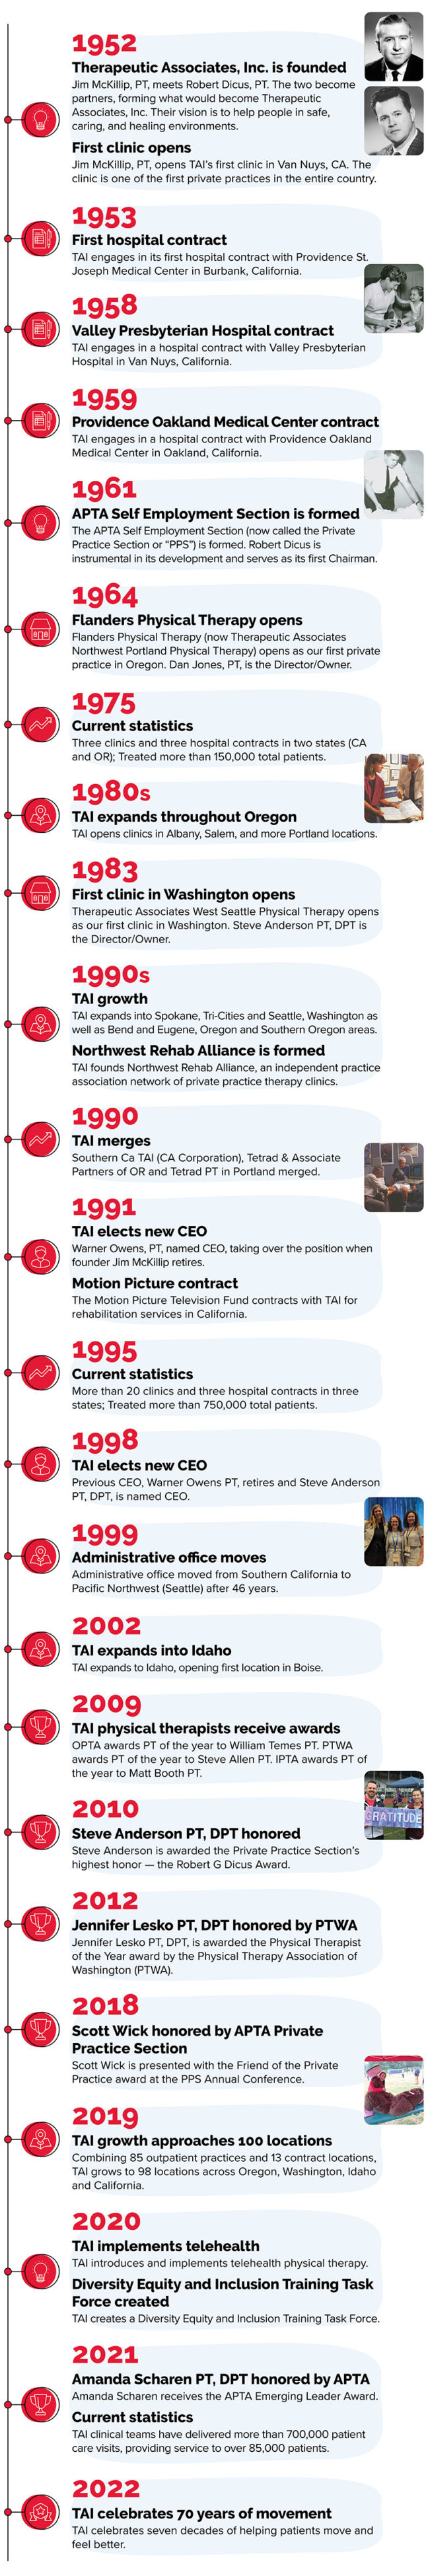 TAI Timeline for 70th Anniversary